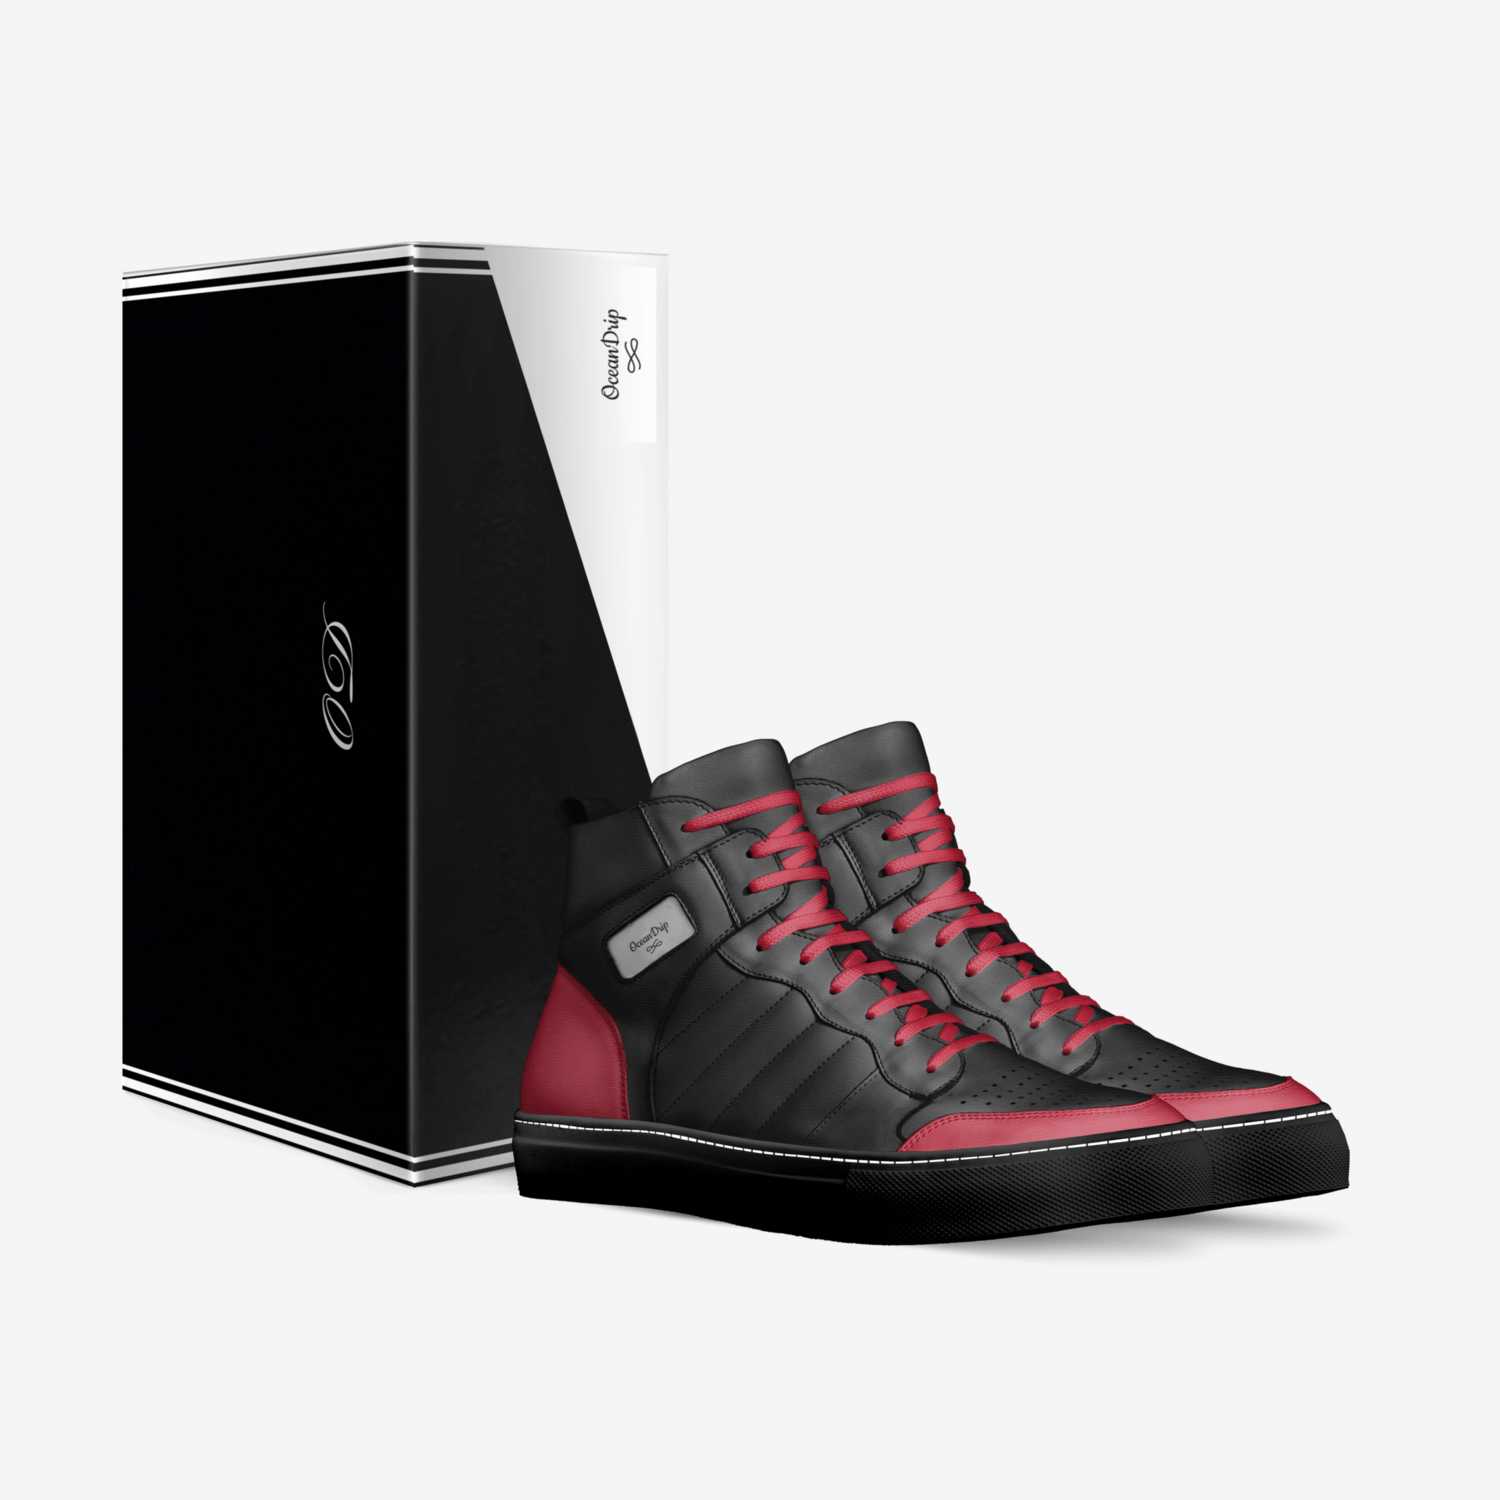 OceanDrip custom made in Italy shoes by Theodie Brown | Box view